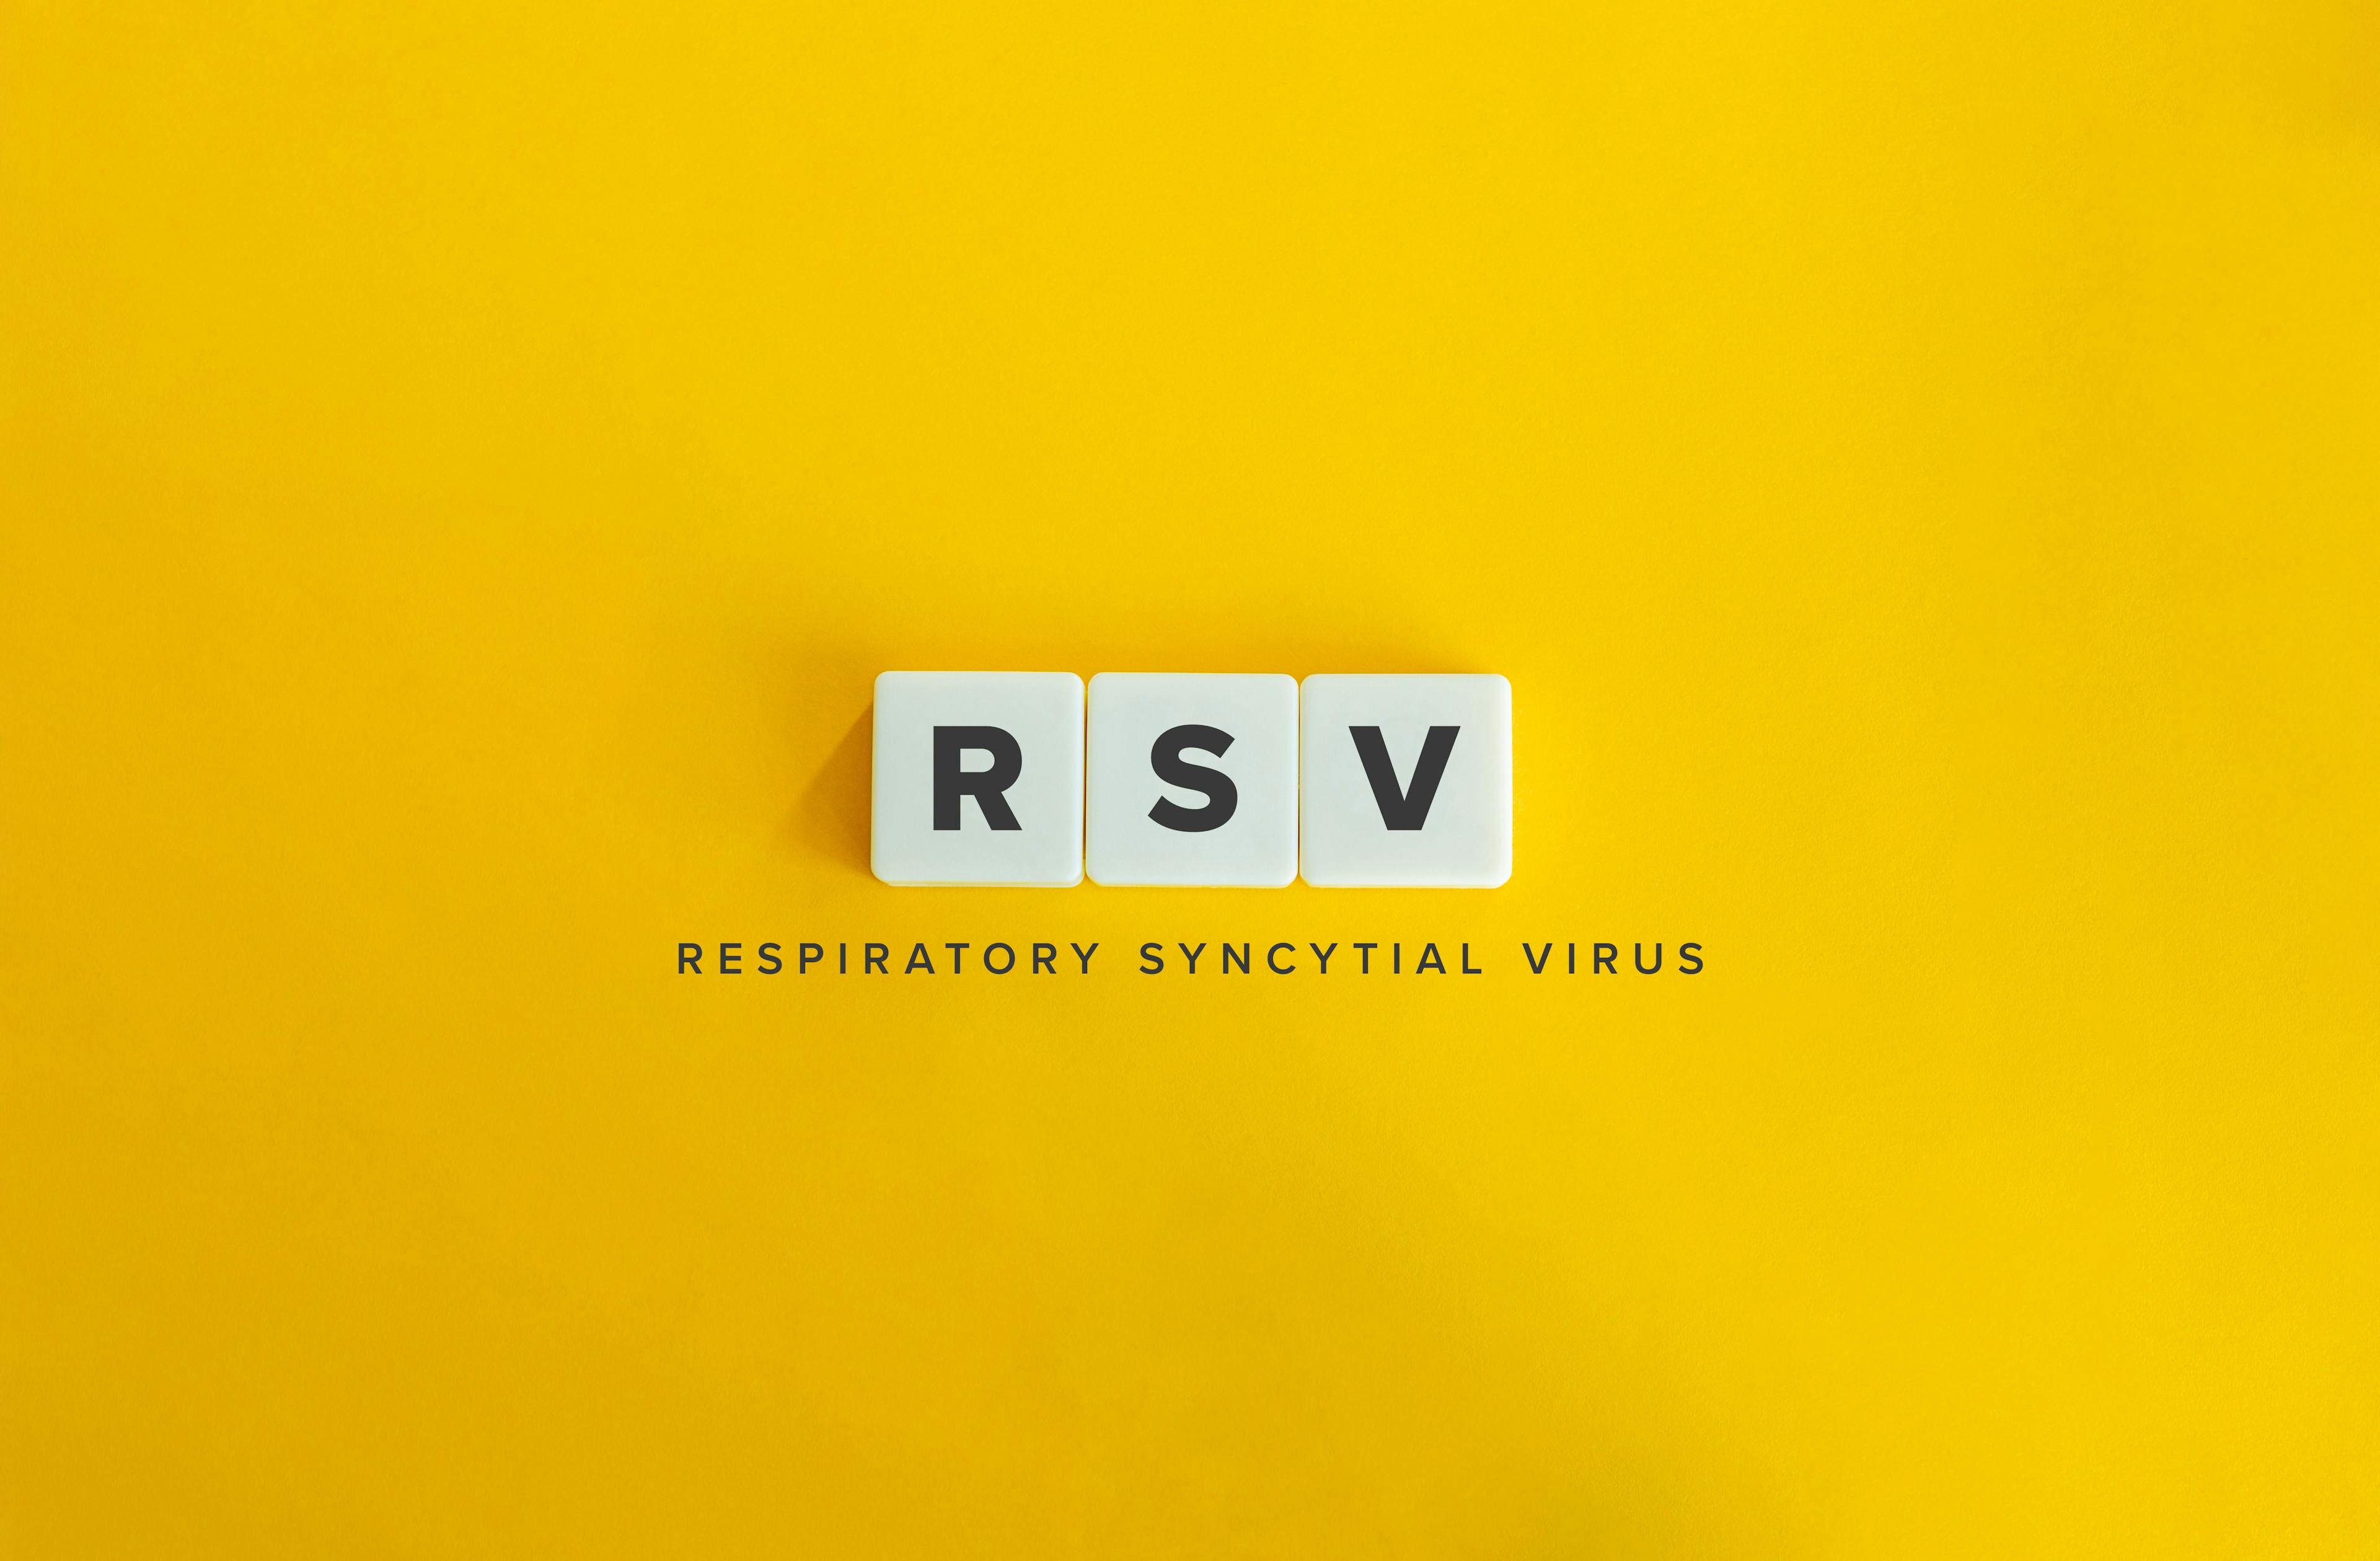 Pivotal Trial Results Show Efficacy of mRNA Vaccine for Respiratory Syncytial Virus